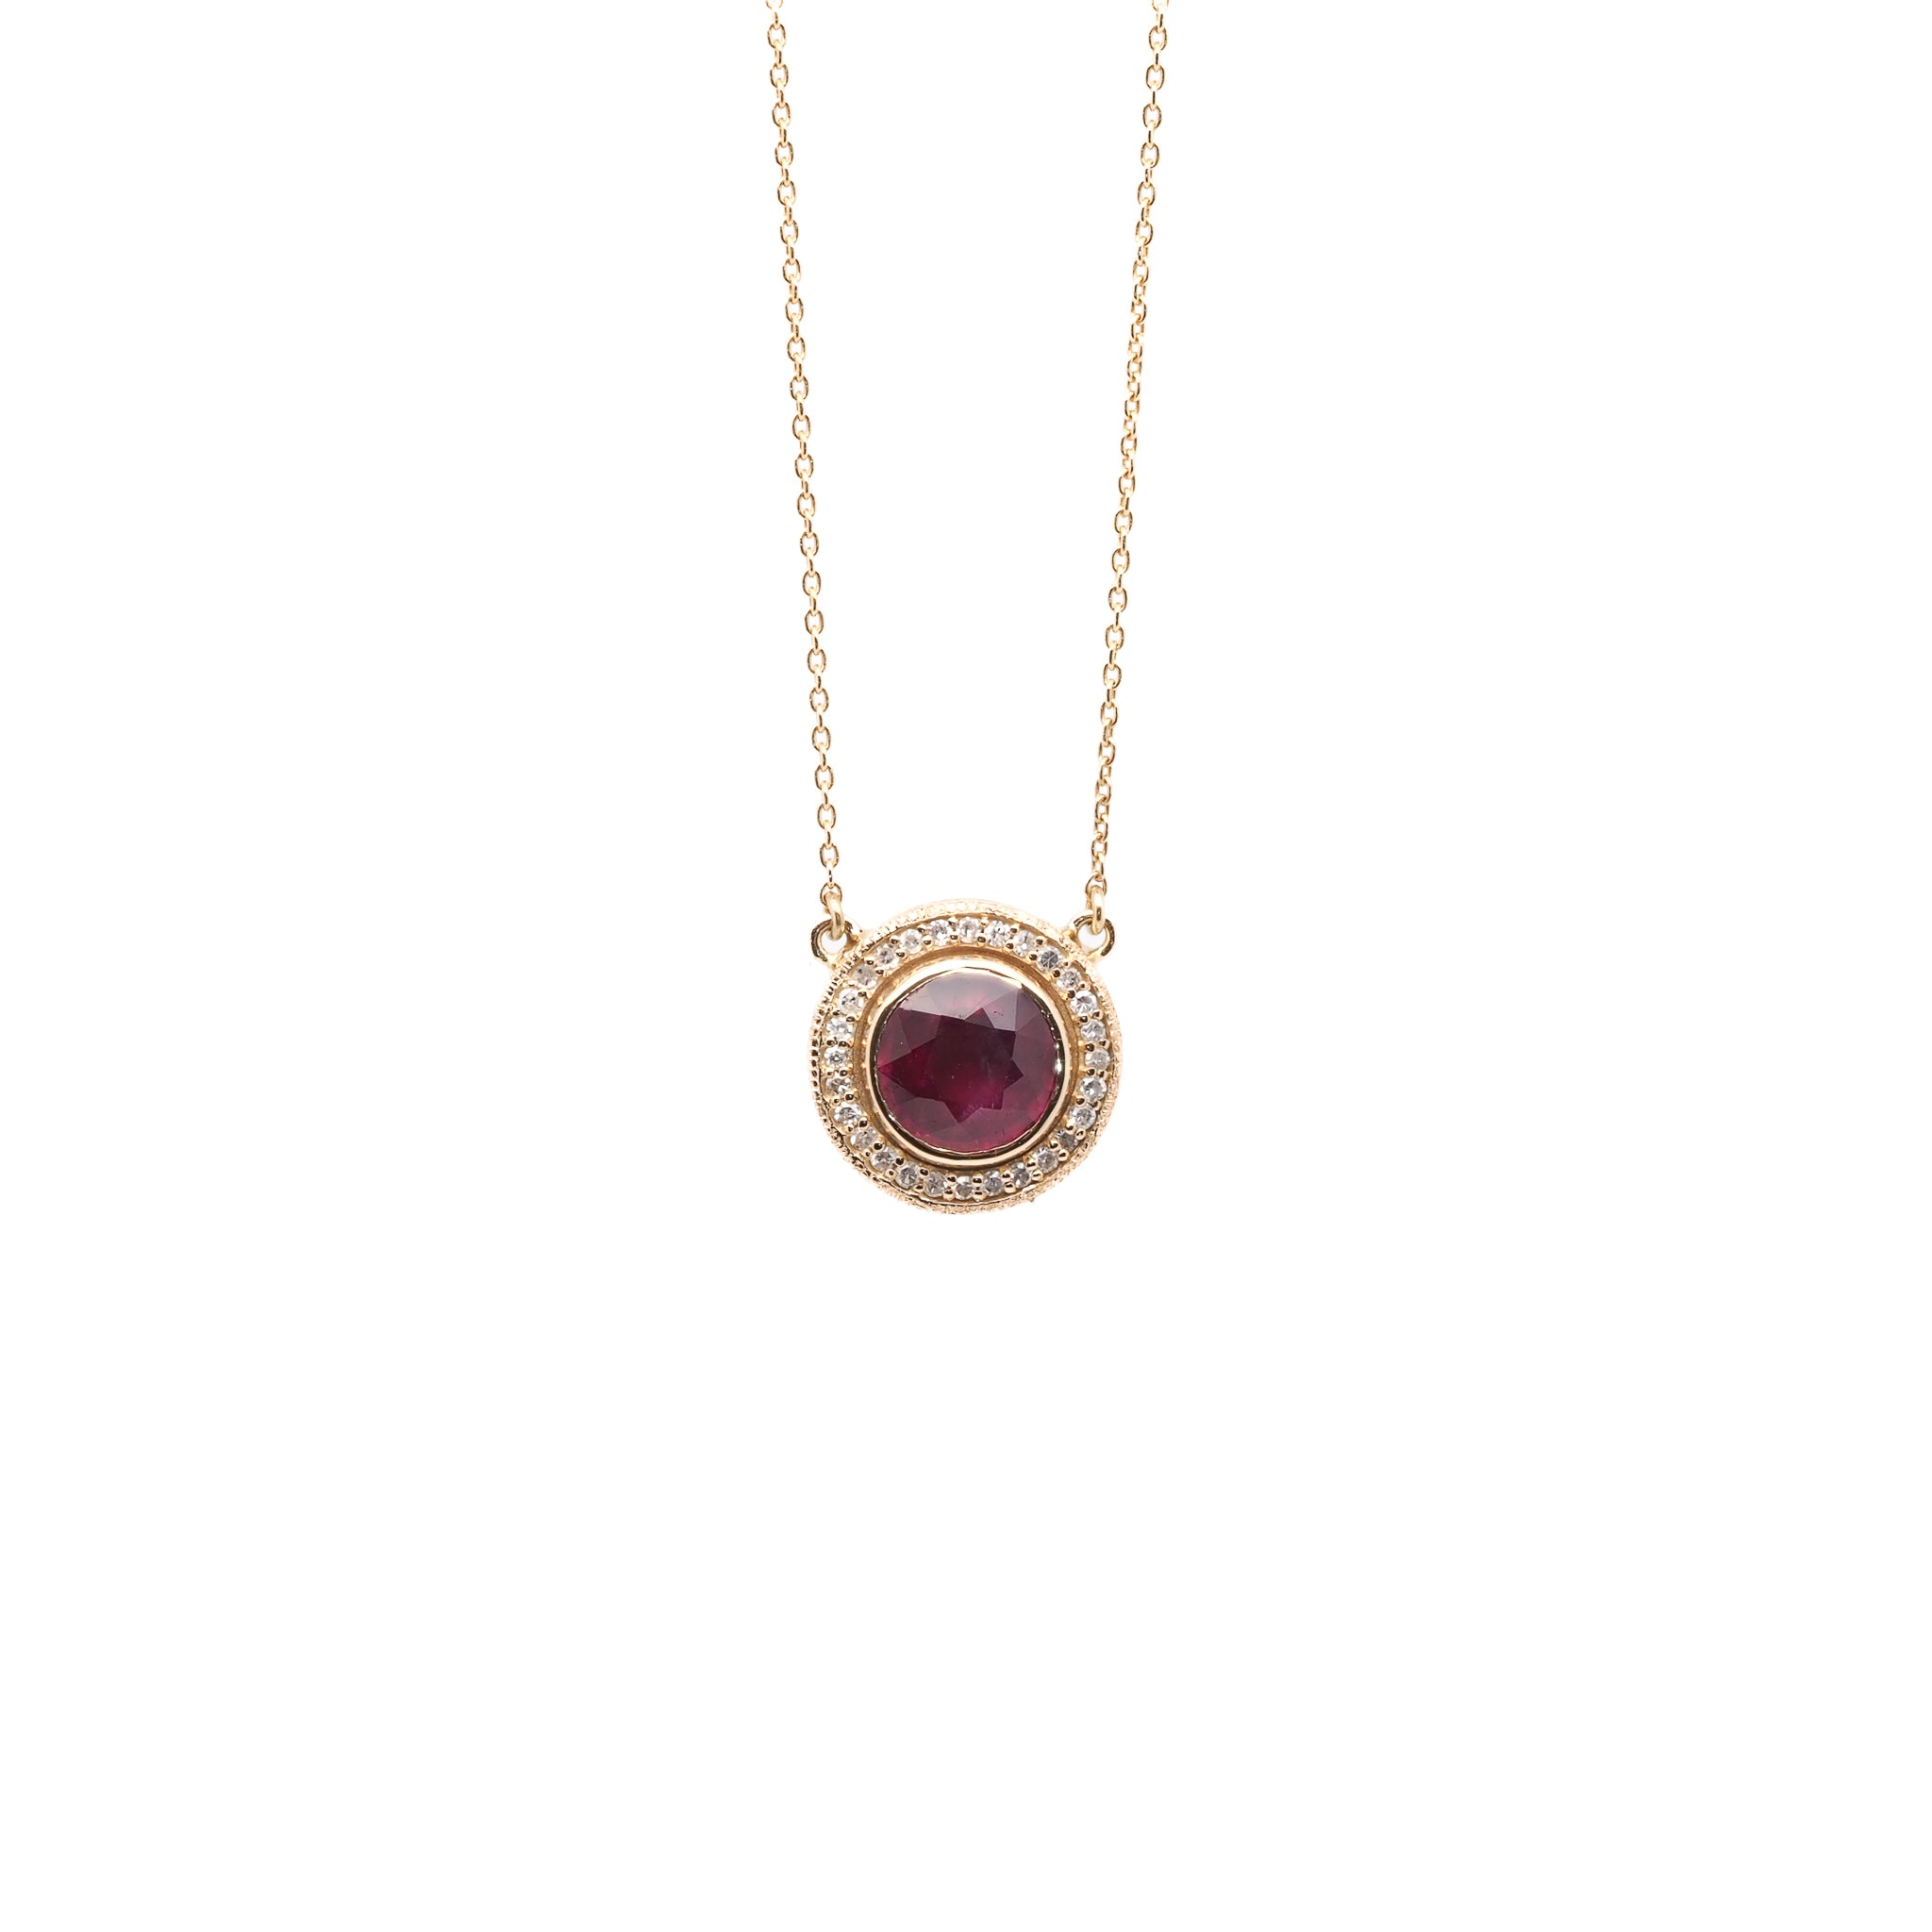 the Elegant Ruby & Diamond Necklace showcasing the stunning 14k yellow gold pendant adorned with a vibrant 1.750ct natural ruby and sparkling 0.40ct diamonds.